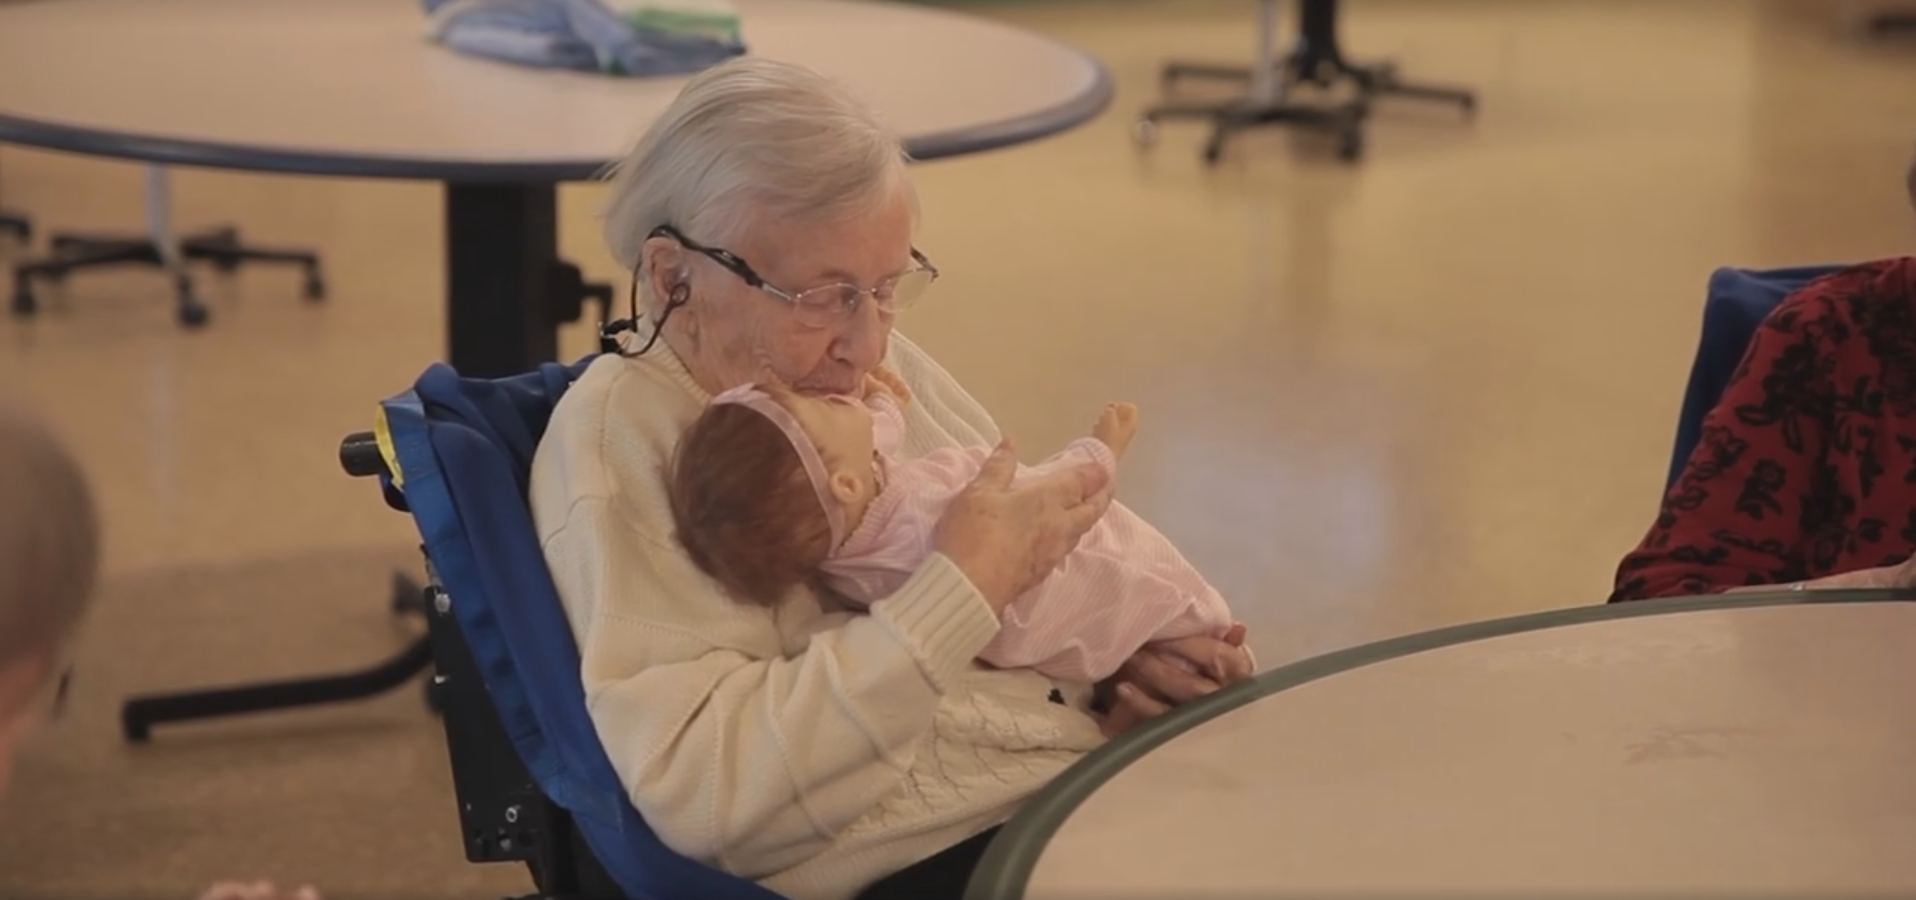 doll therapy for dementia